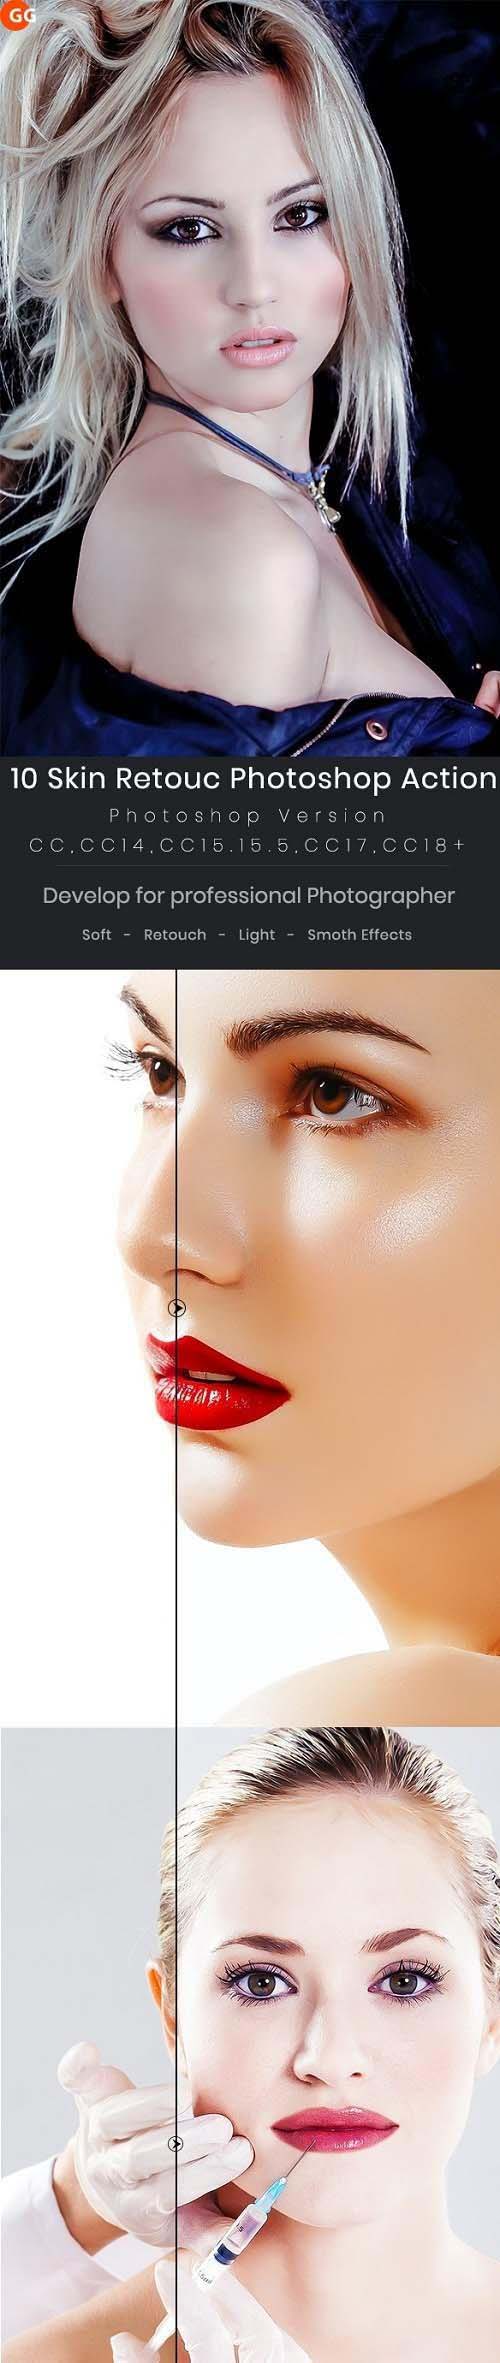 10 Skin Retouch Photoshop Action 21648340